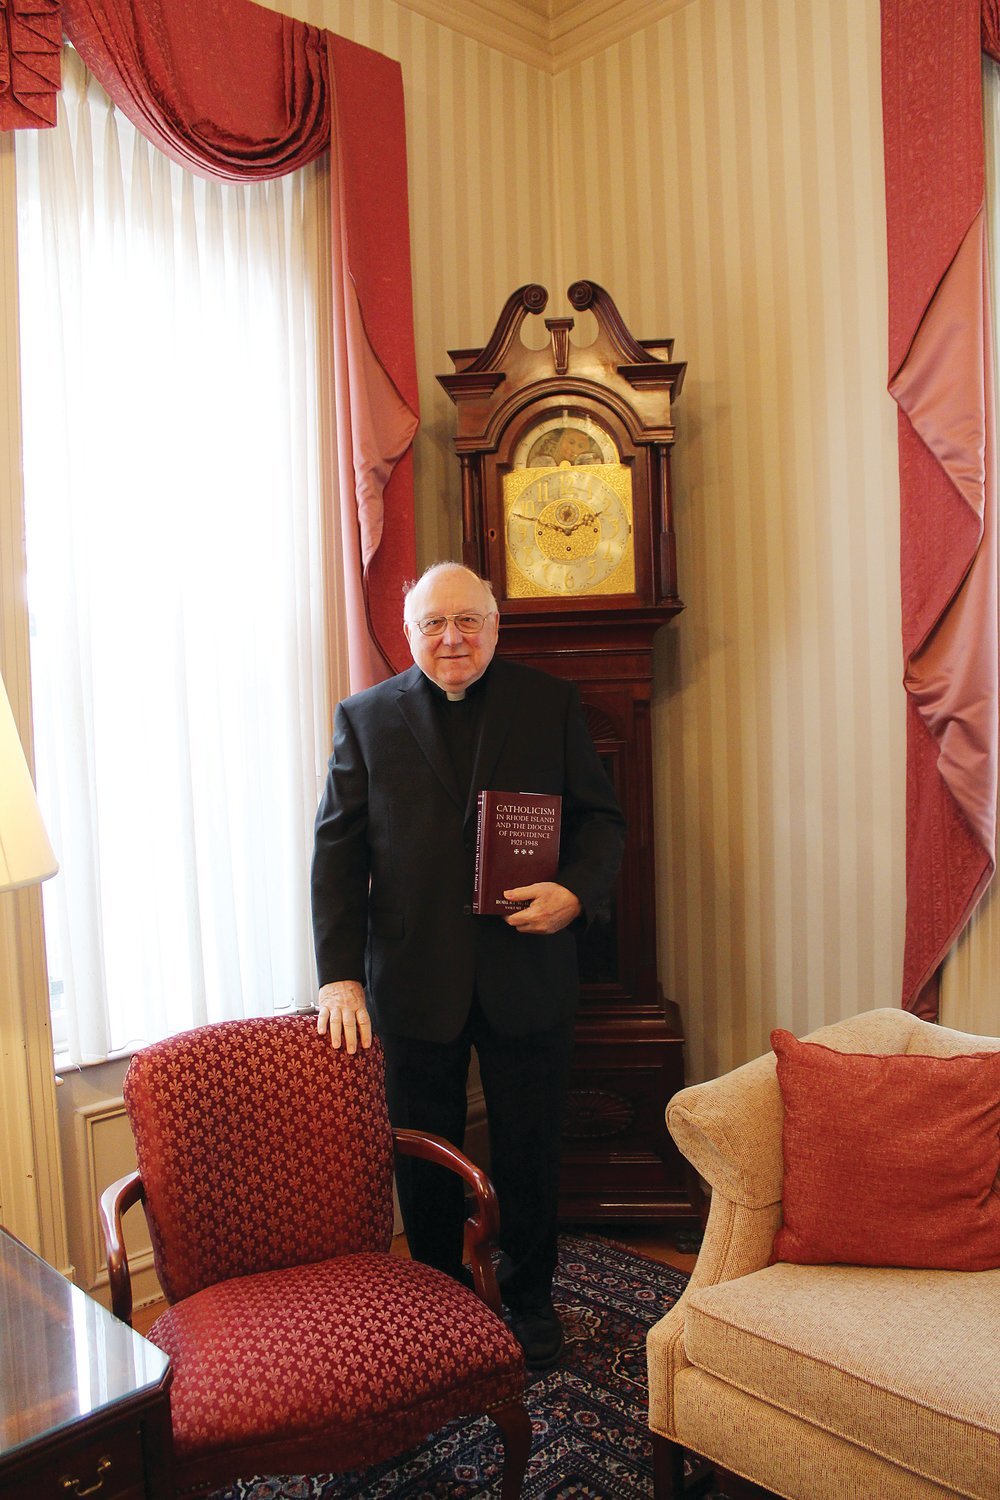 DOCUMENTING THE PASSAGE OF TIME: Father Robert W. Hayman holds a copy of his latest work in his “Catholicism in Rhode Island” series. The 600-page volume, exhaustive in its research, offers a panoramic history of the diocese from 1921-1948.